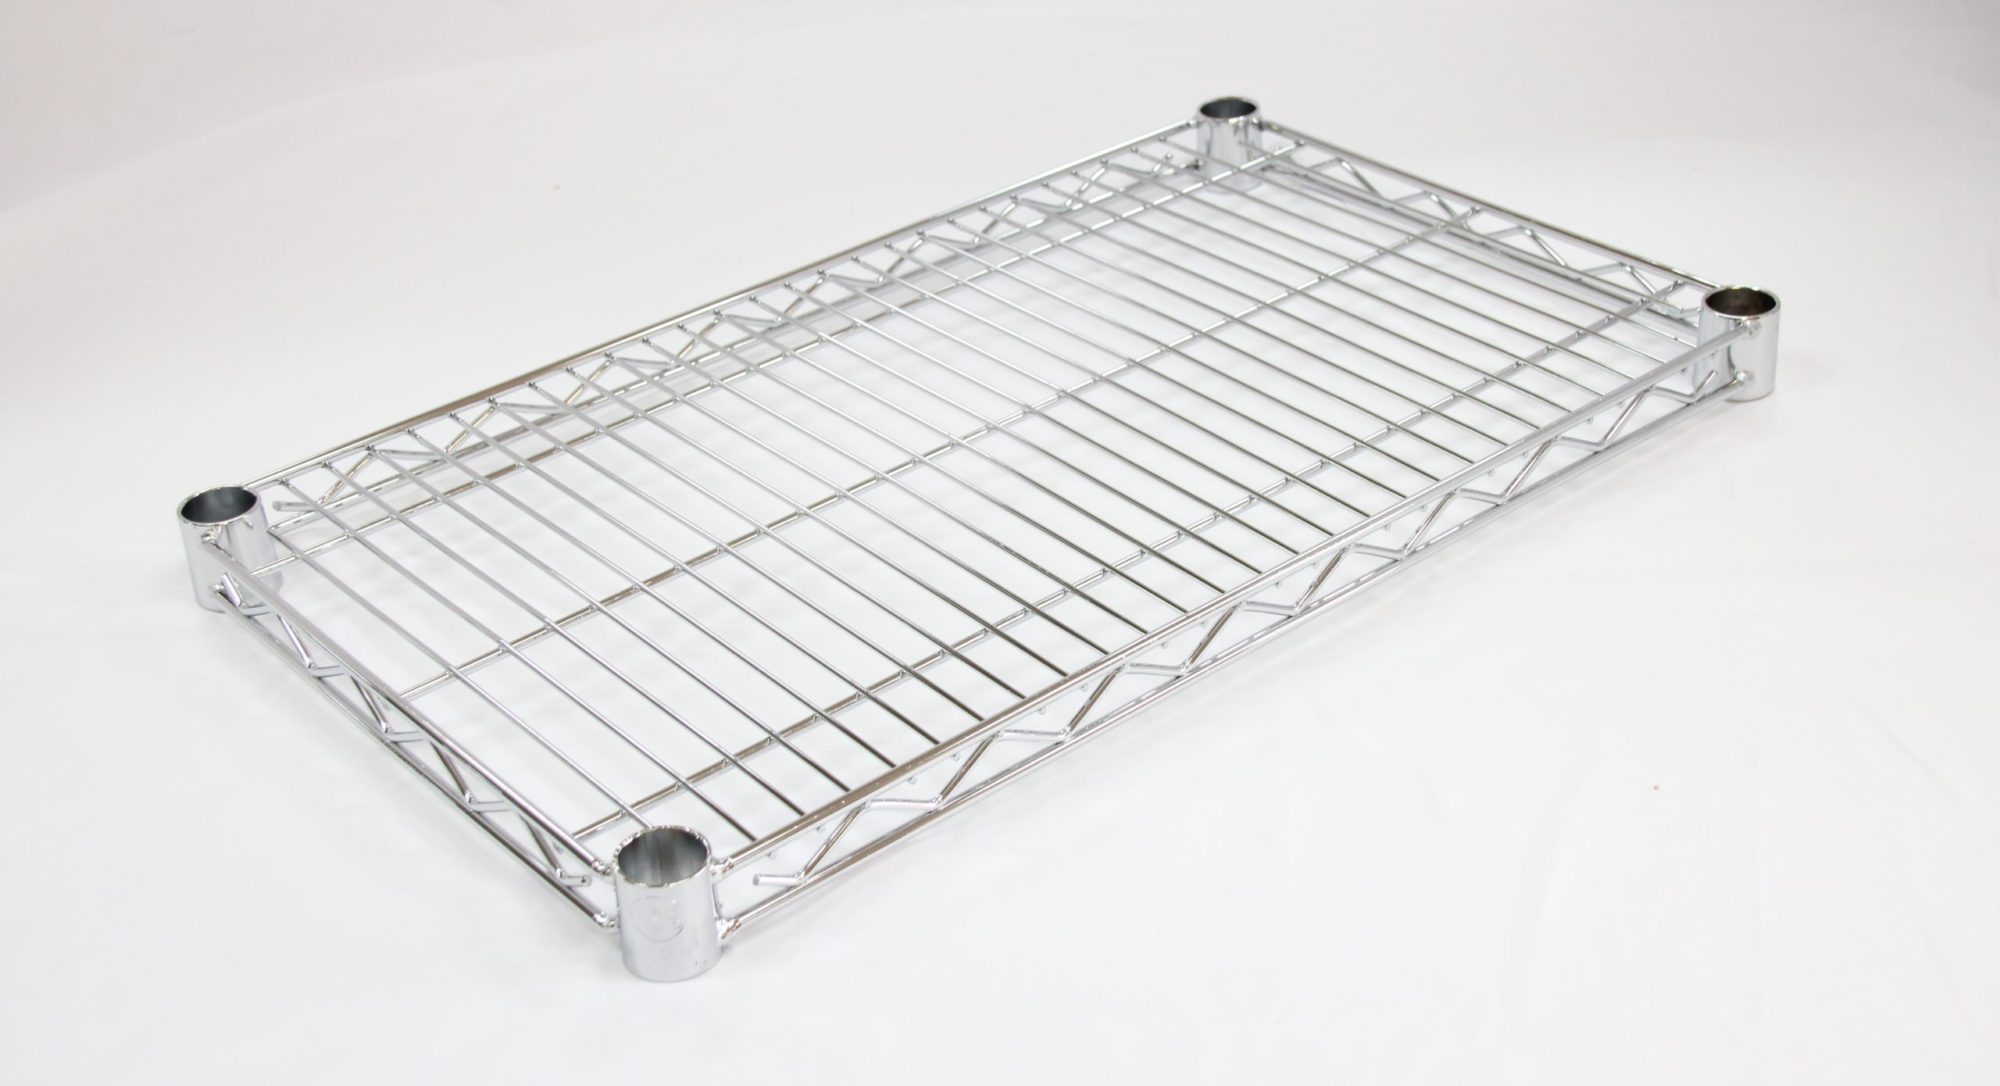 Omcan Wire Mesh Shelving 18" x 72" 20113 Chrome 2 Pack-S1872C